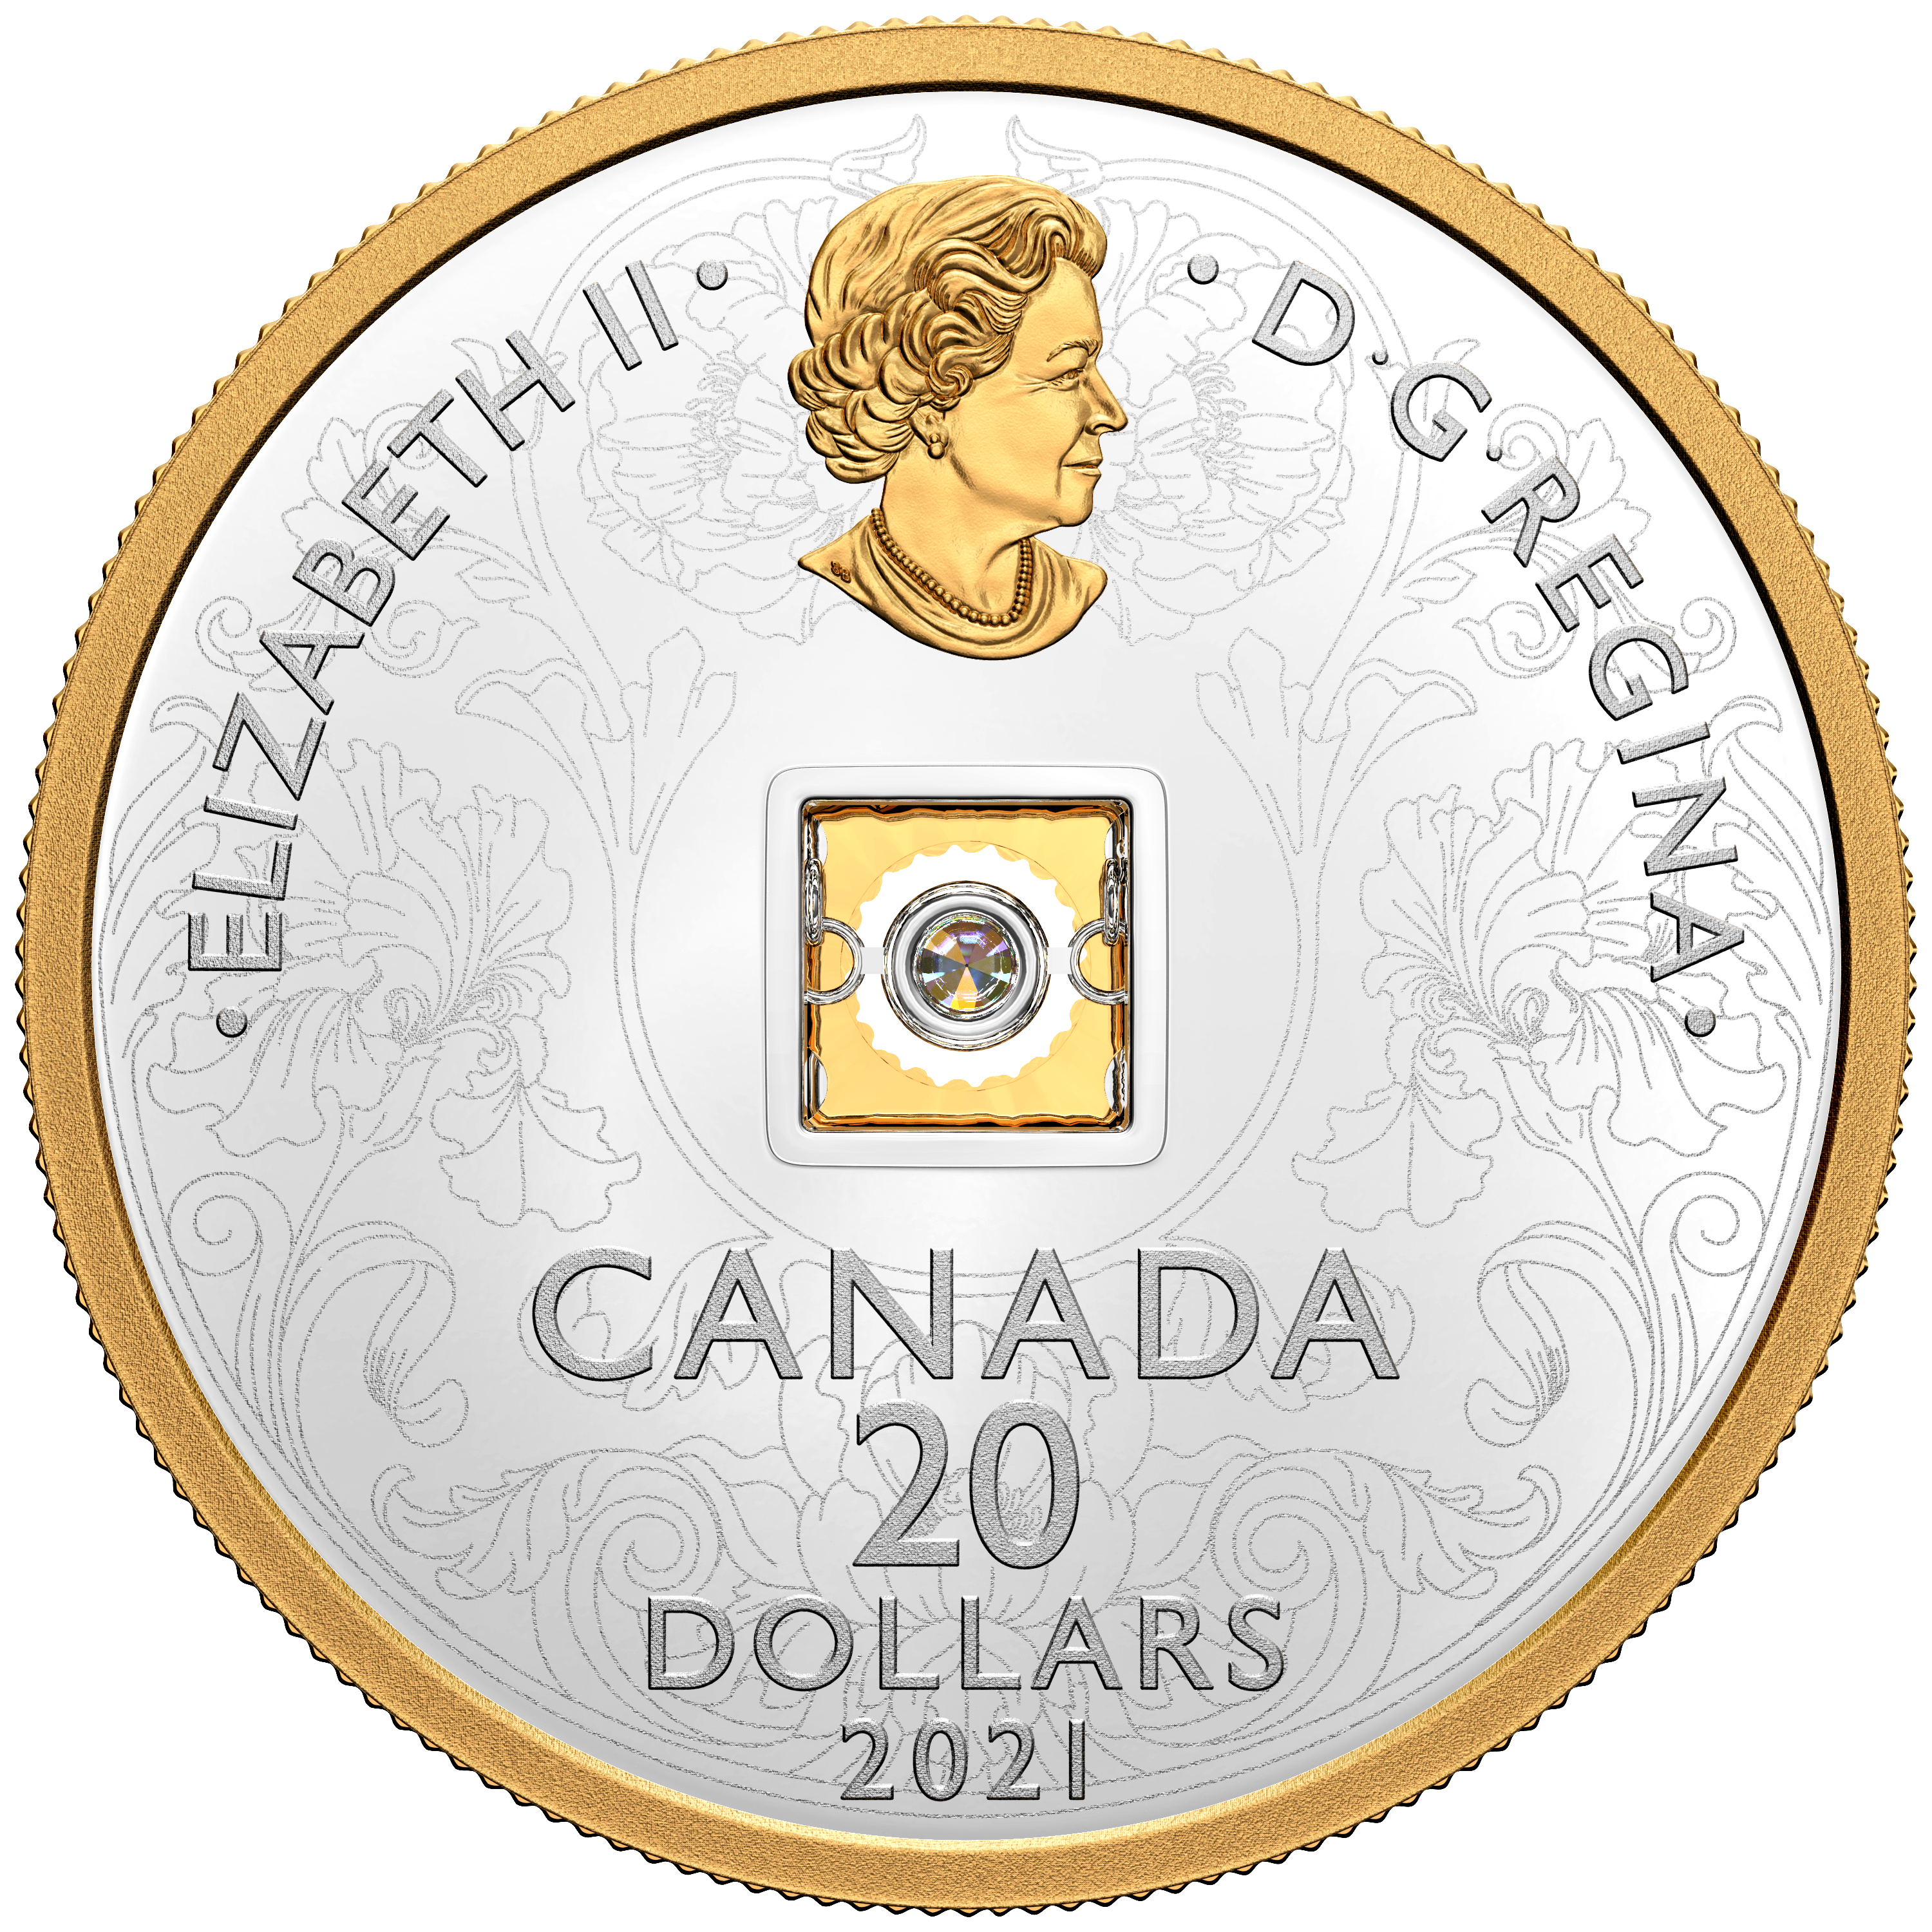 SPARKLE OF THE HEART Silver Coin $20 Canada 2021